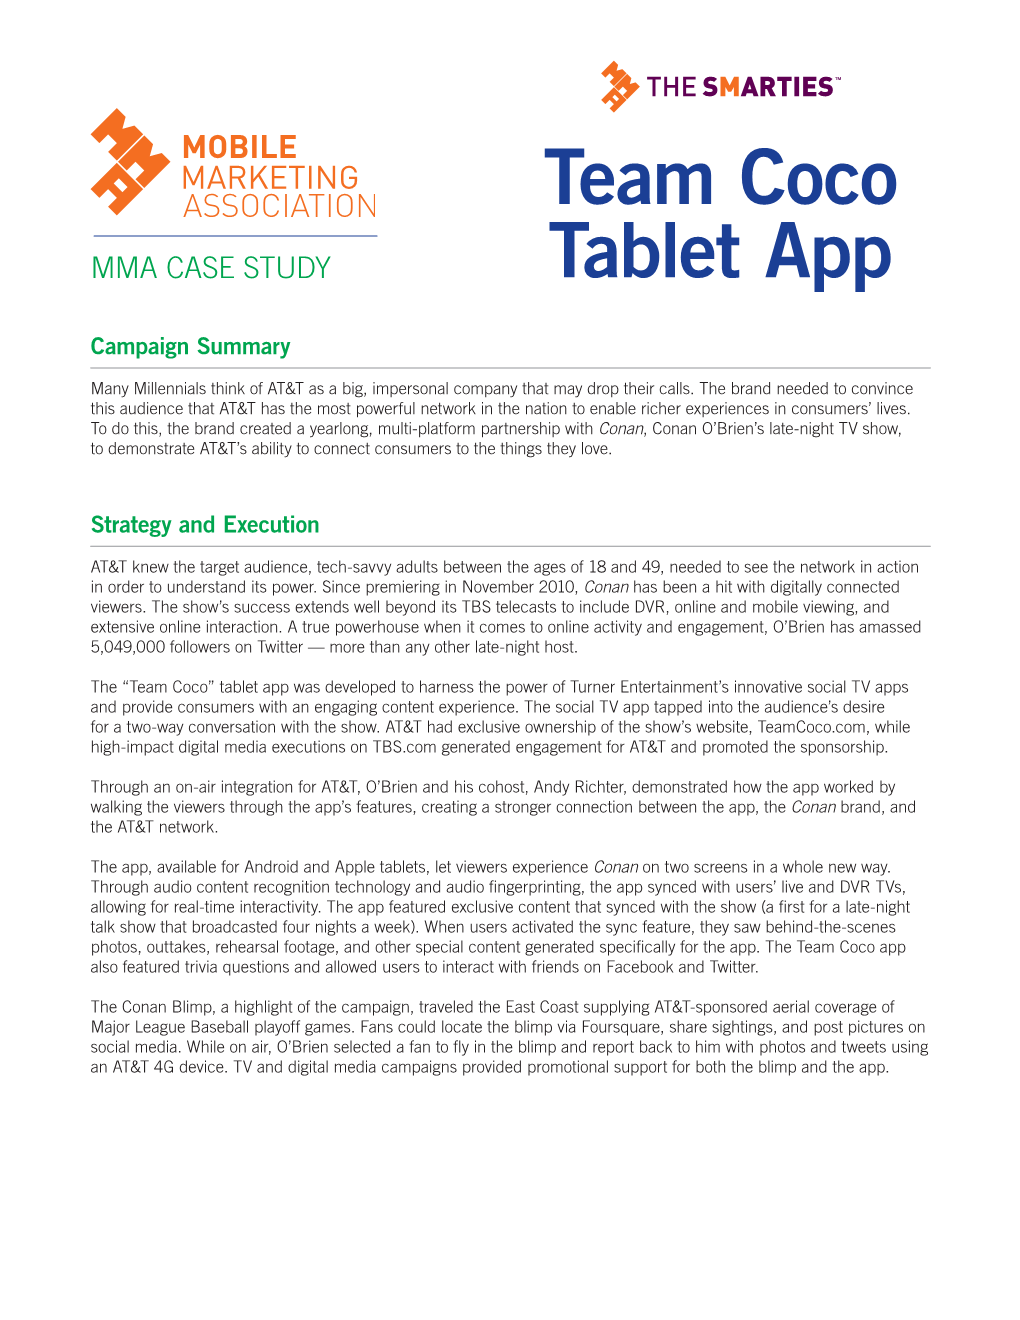 Team Coco Tablet App Resulted in 40,000 Downloads in the First Few Months, with Usage Continuing to Grow